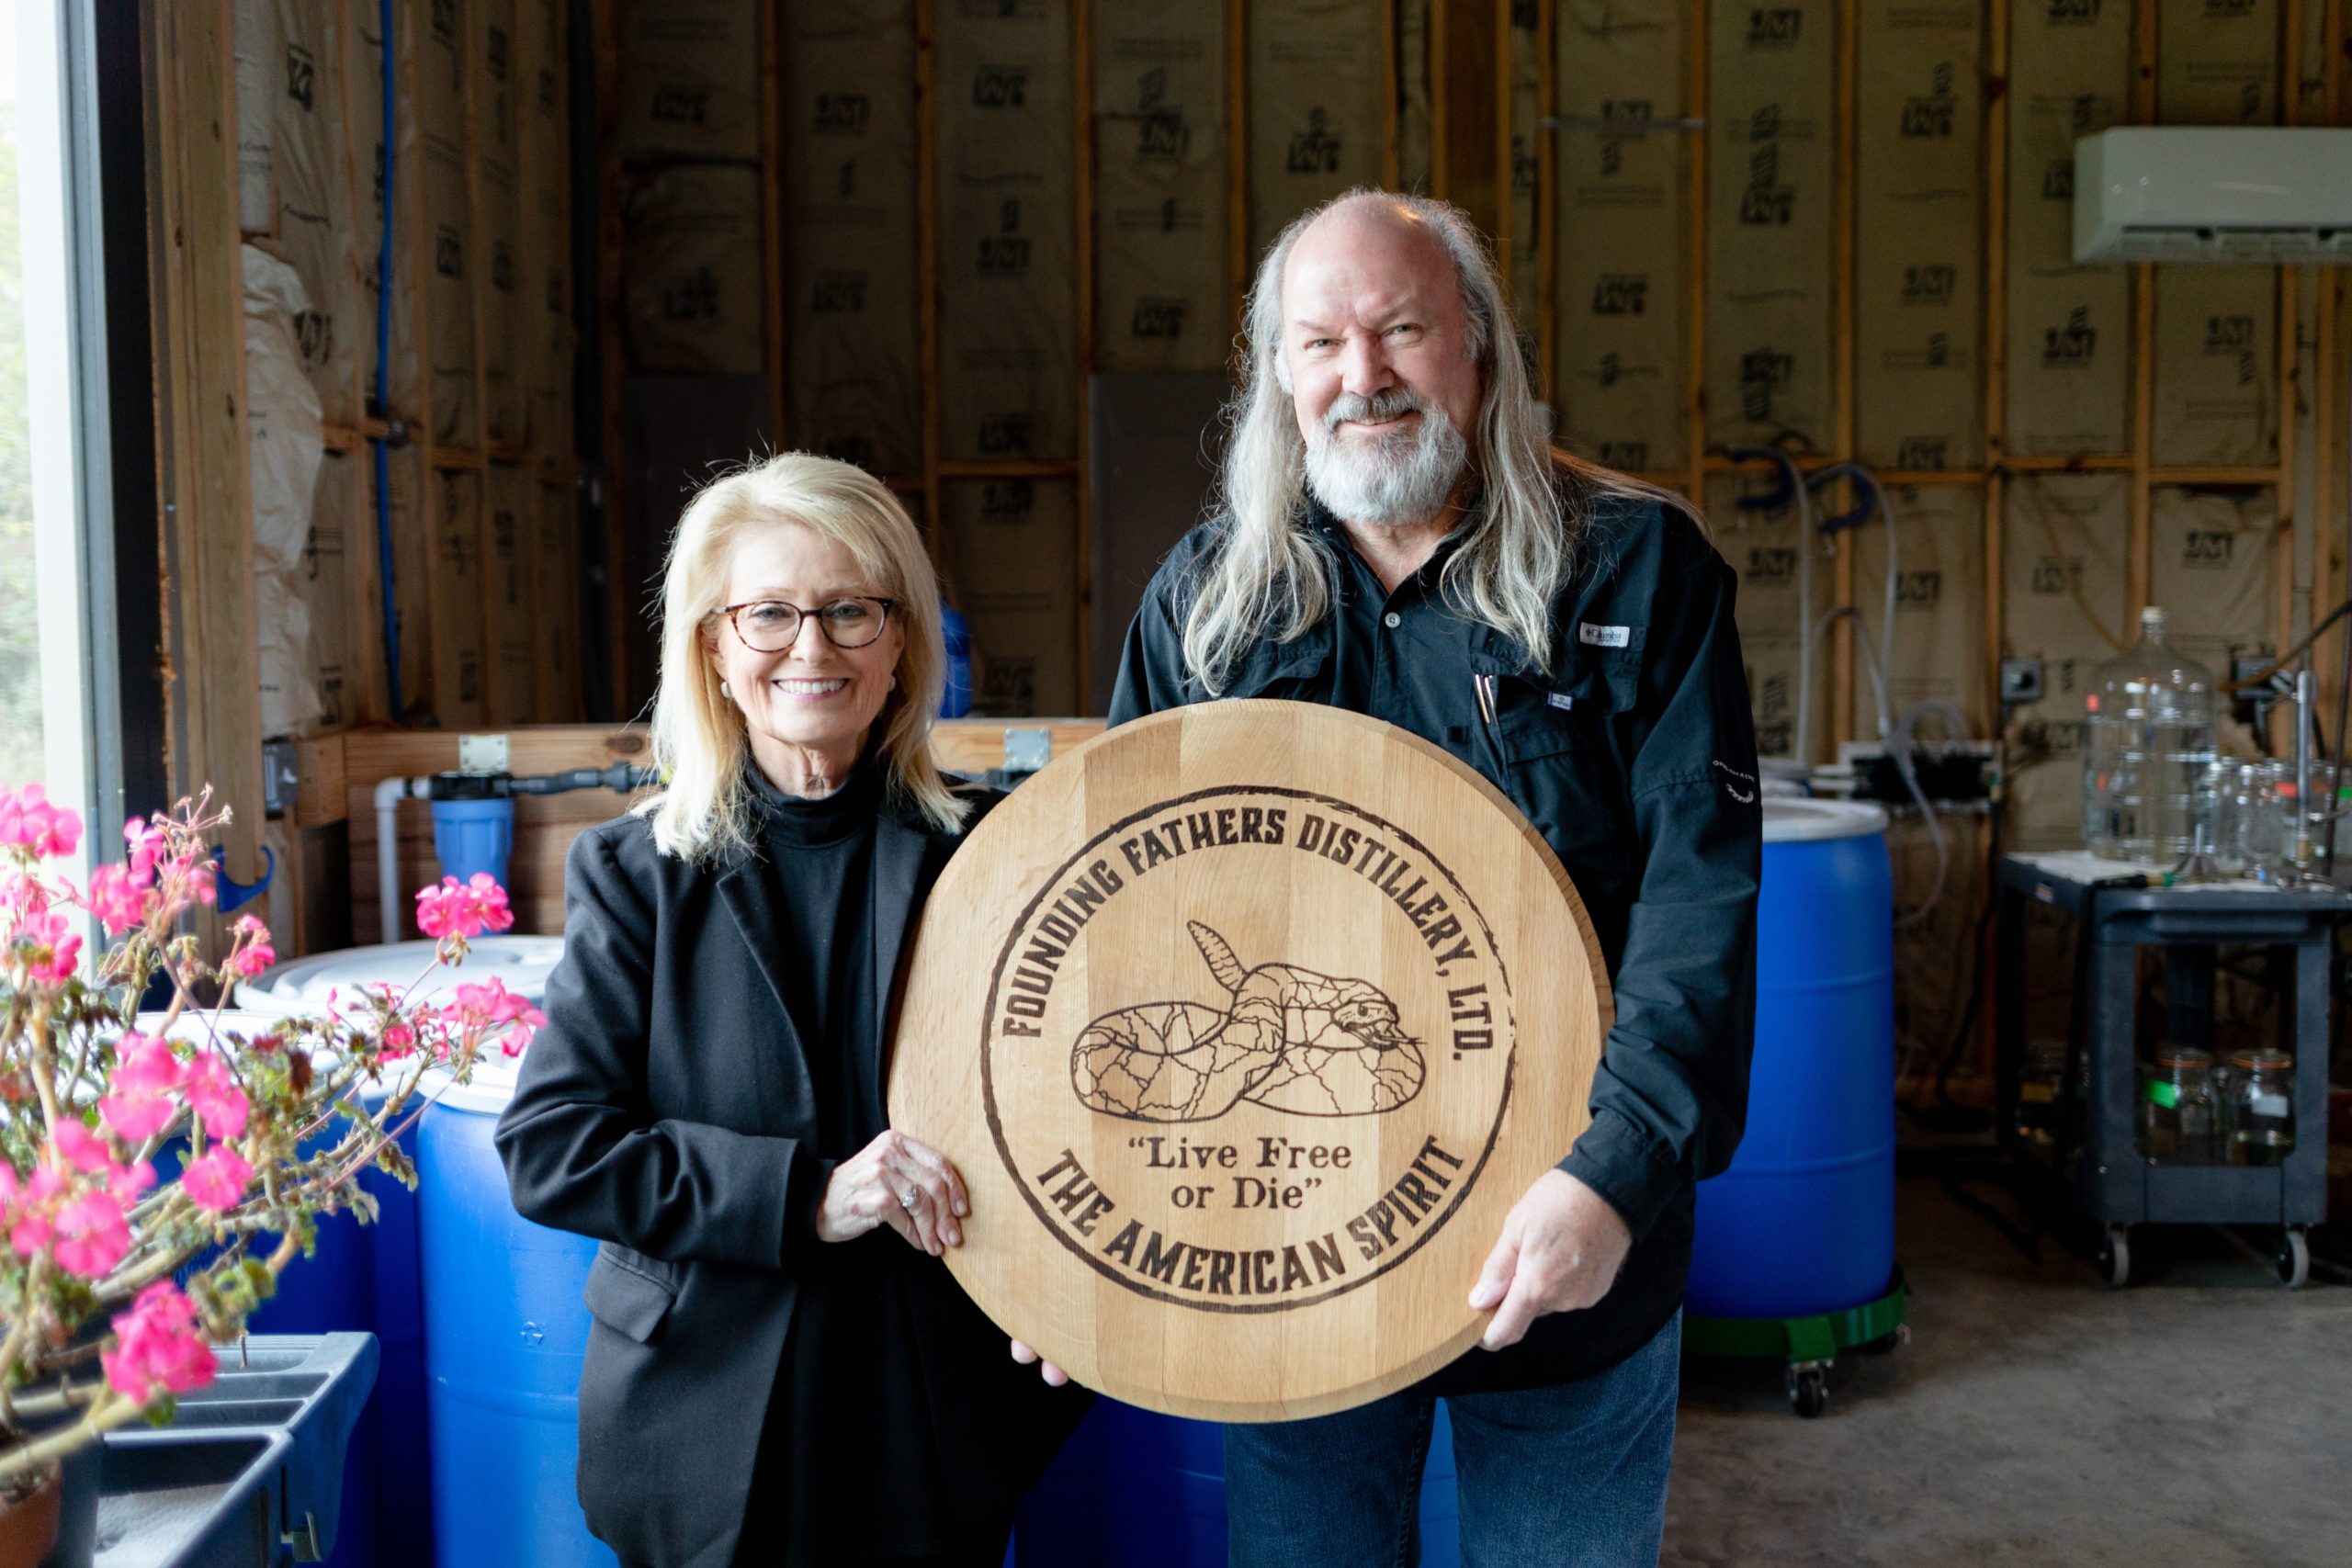 Jeff Cooper and Marta Price, founders of Founding Fathers Distillery in High Point, NC stand with a barrel lid.